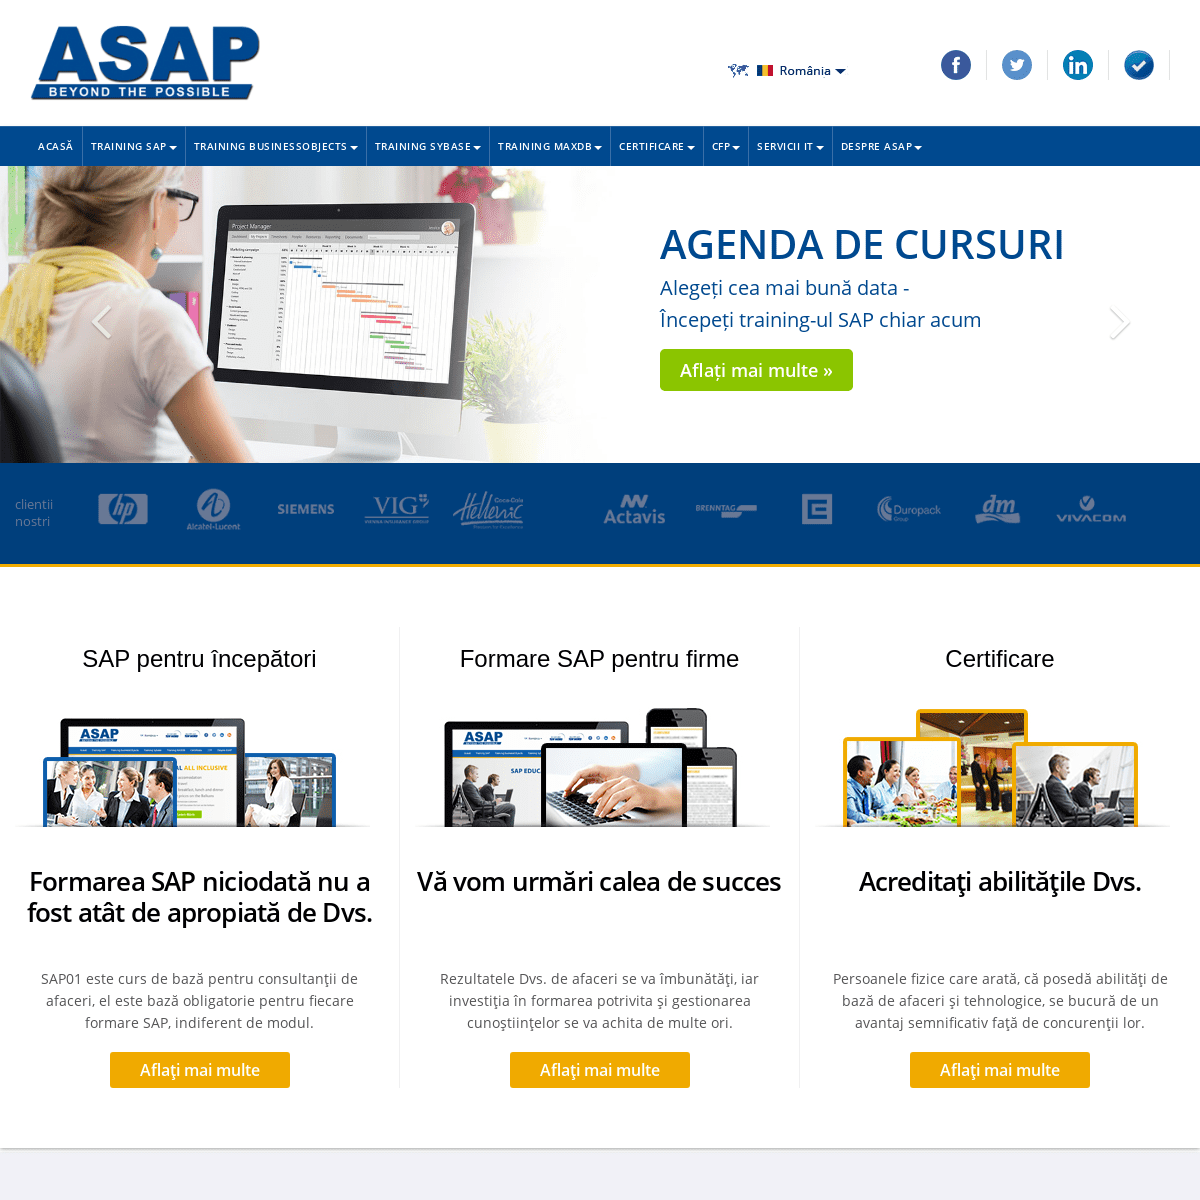 A complete backup of https://asap.ro